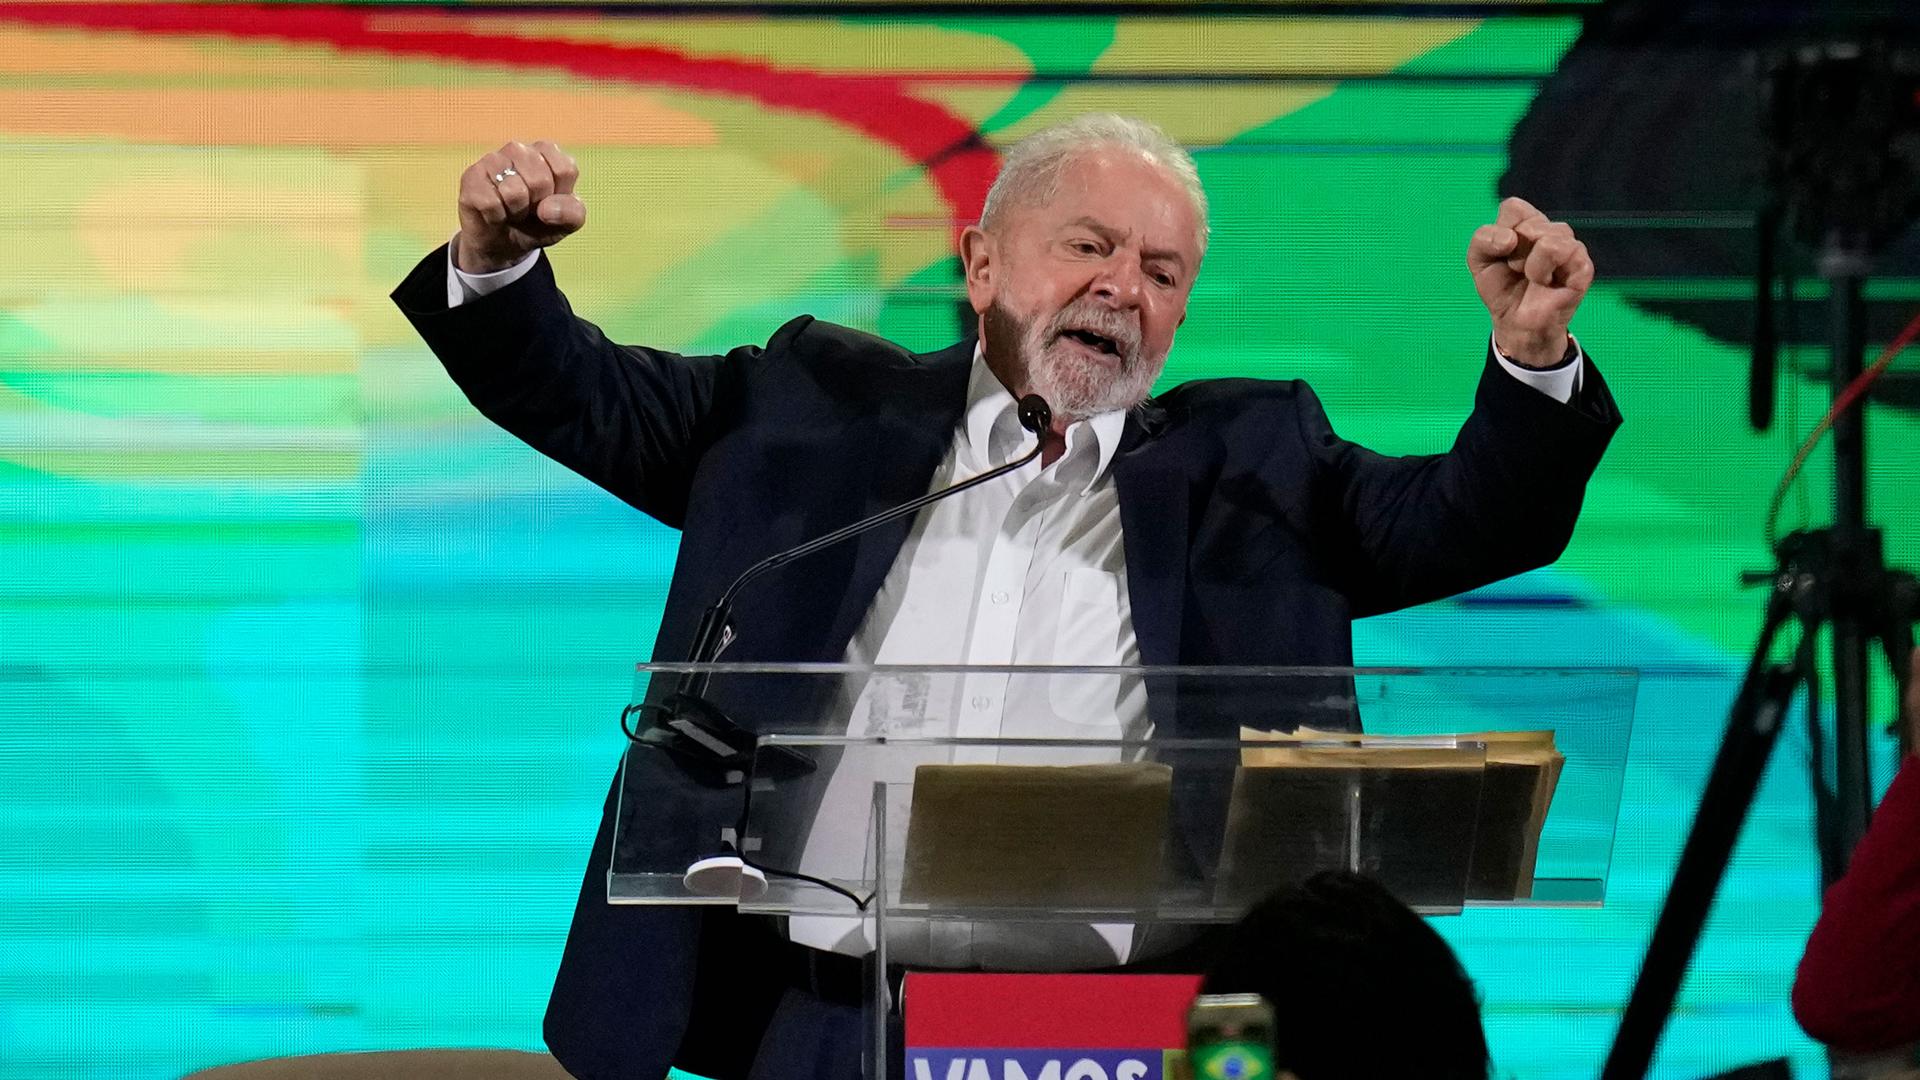 Former Brazilian President Luiz Inácio Lula da Silva speaks during his announcement of his candidacy for the country’s upcoming presidential election, in Sao Paulo, Brazil, Saturday, May 7, 2022.